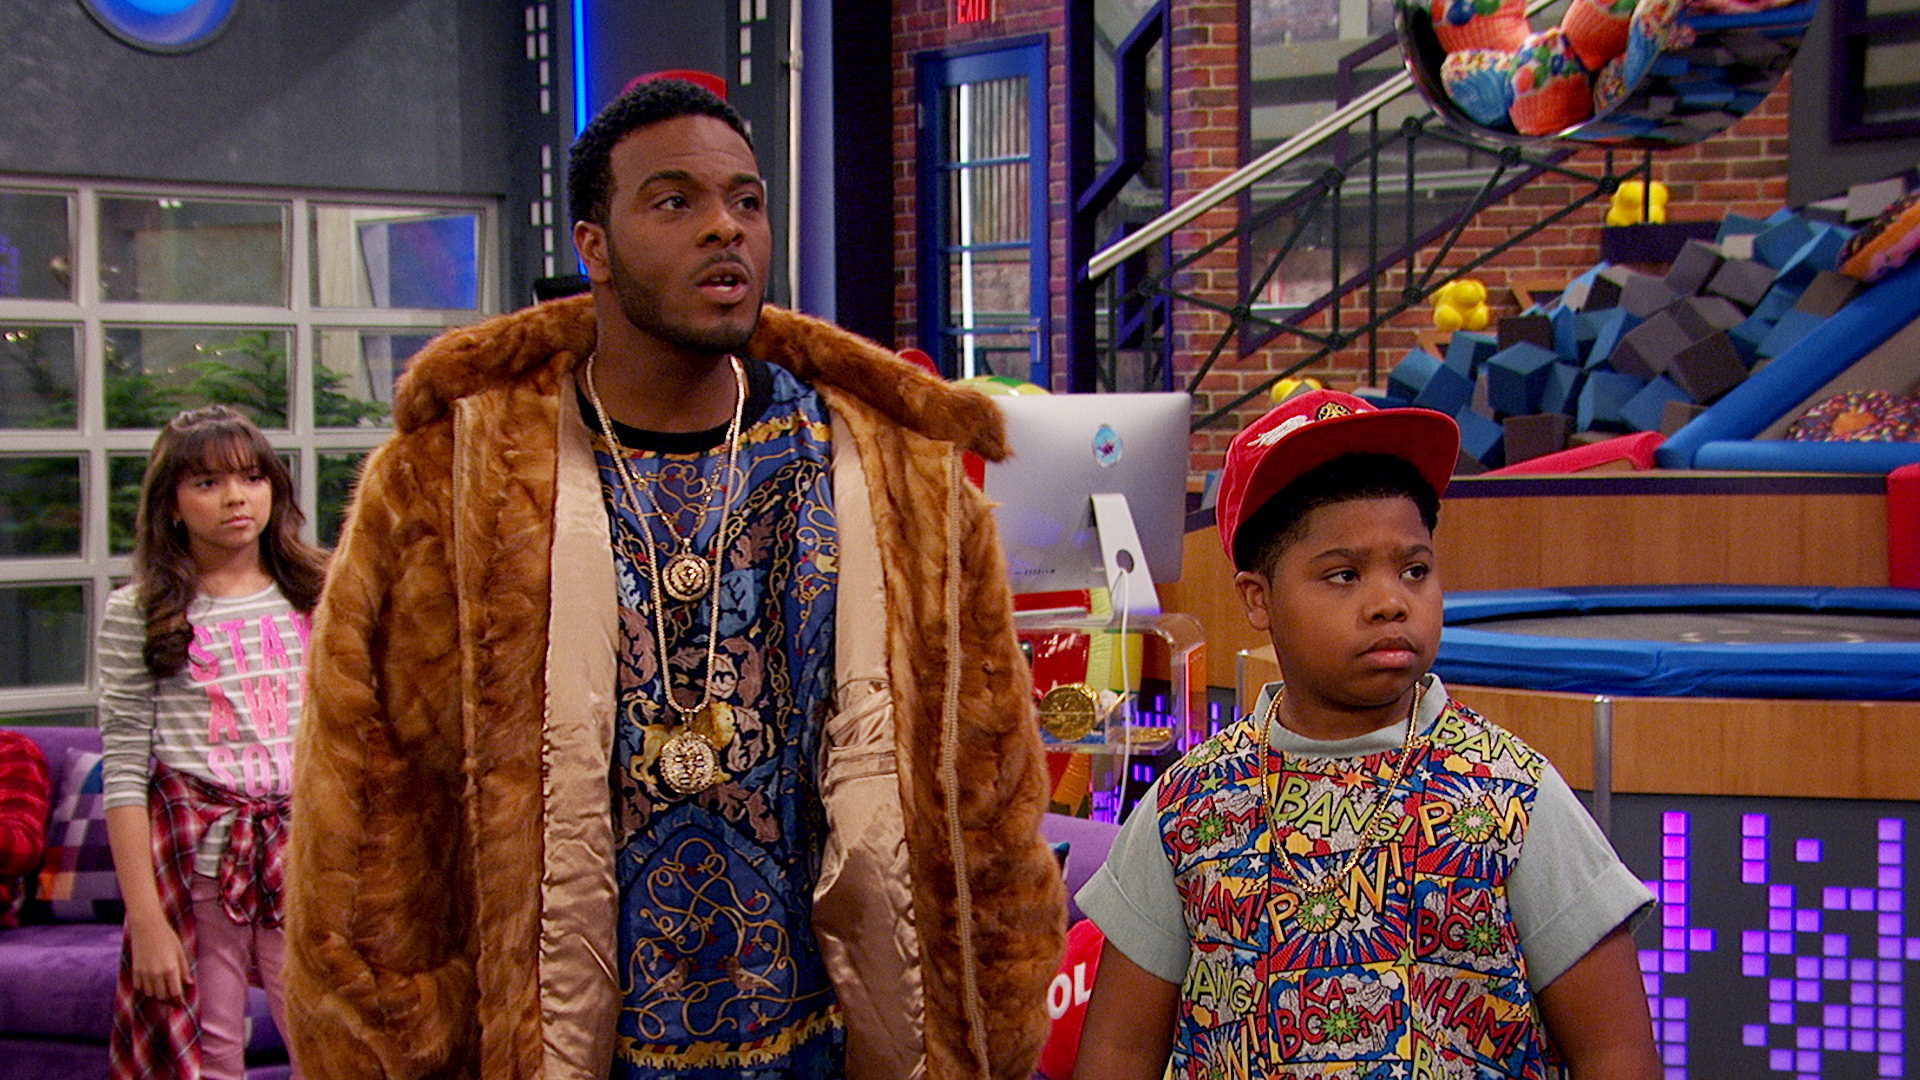 Game Shakers: The New Level - (Video Clip)